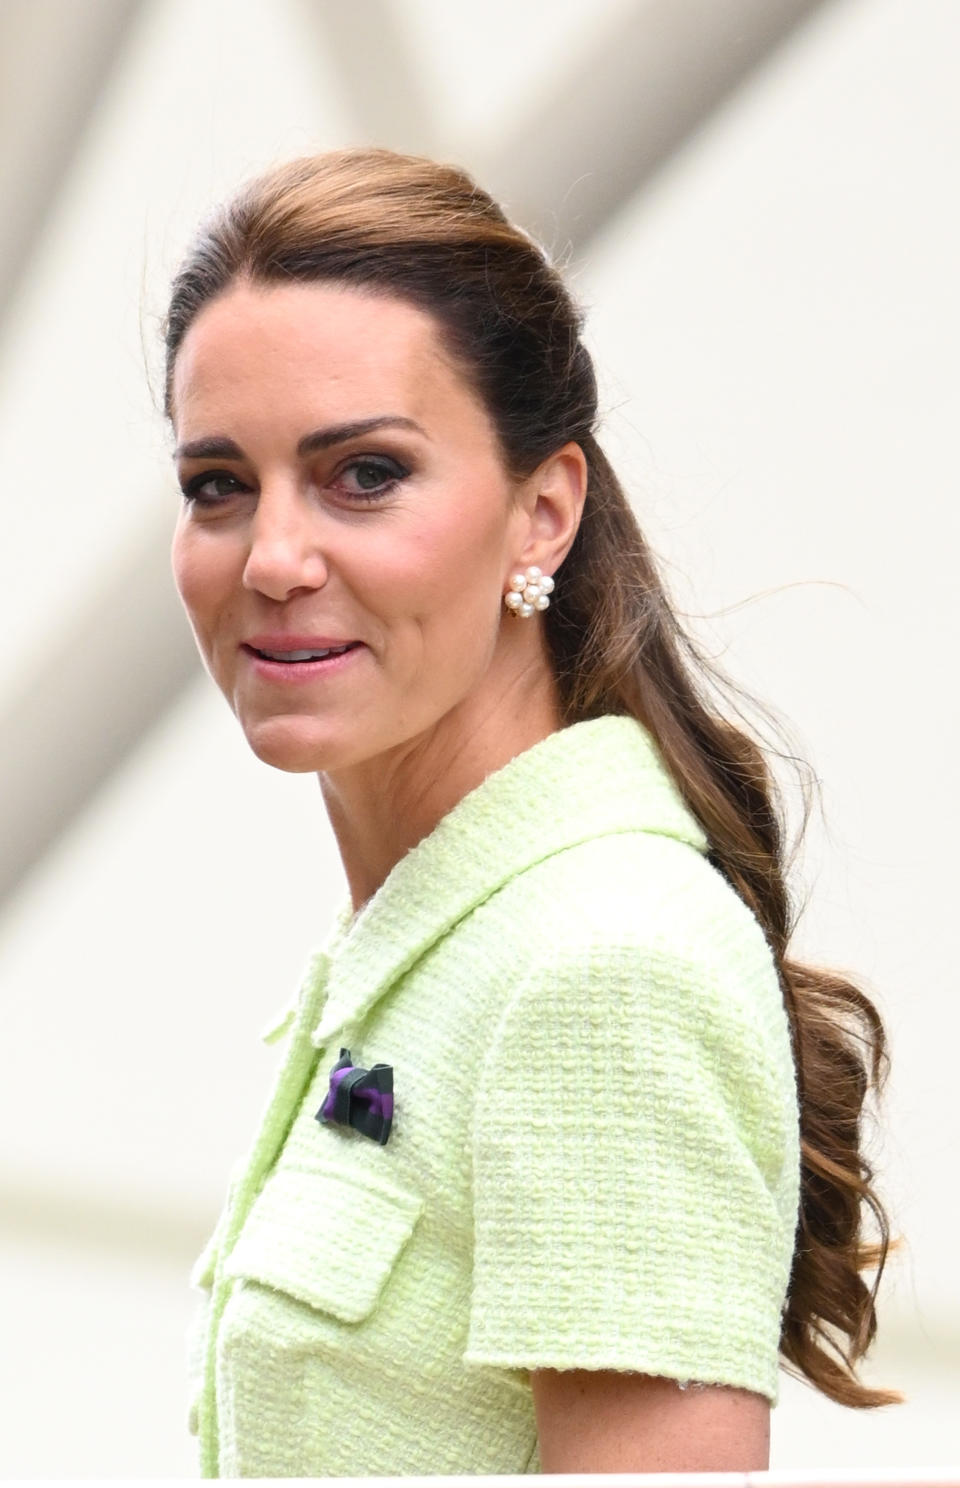 Kate&#39;s smoky eye and earrings were the focus, as her pulled up hair framed her face